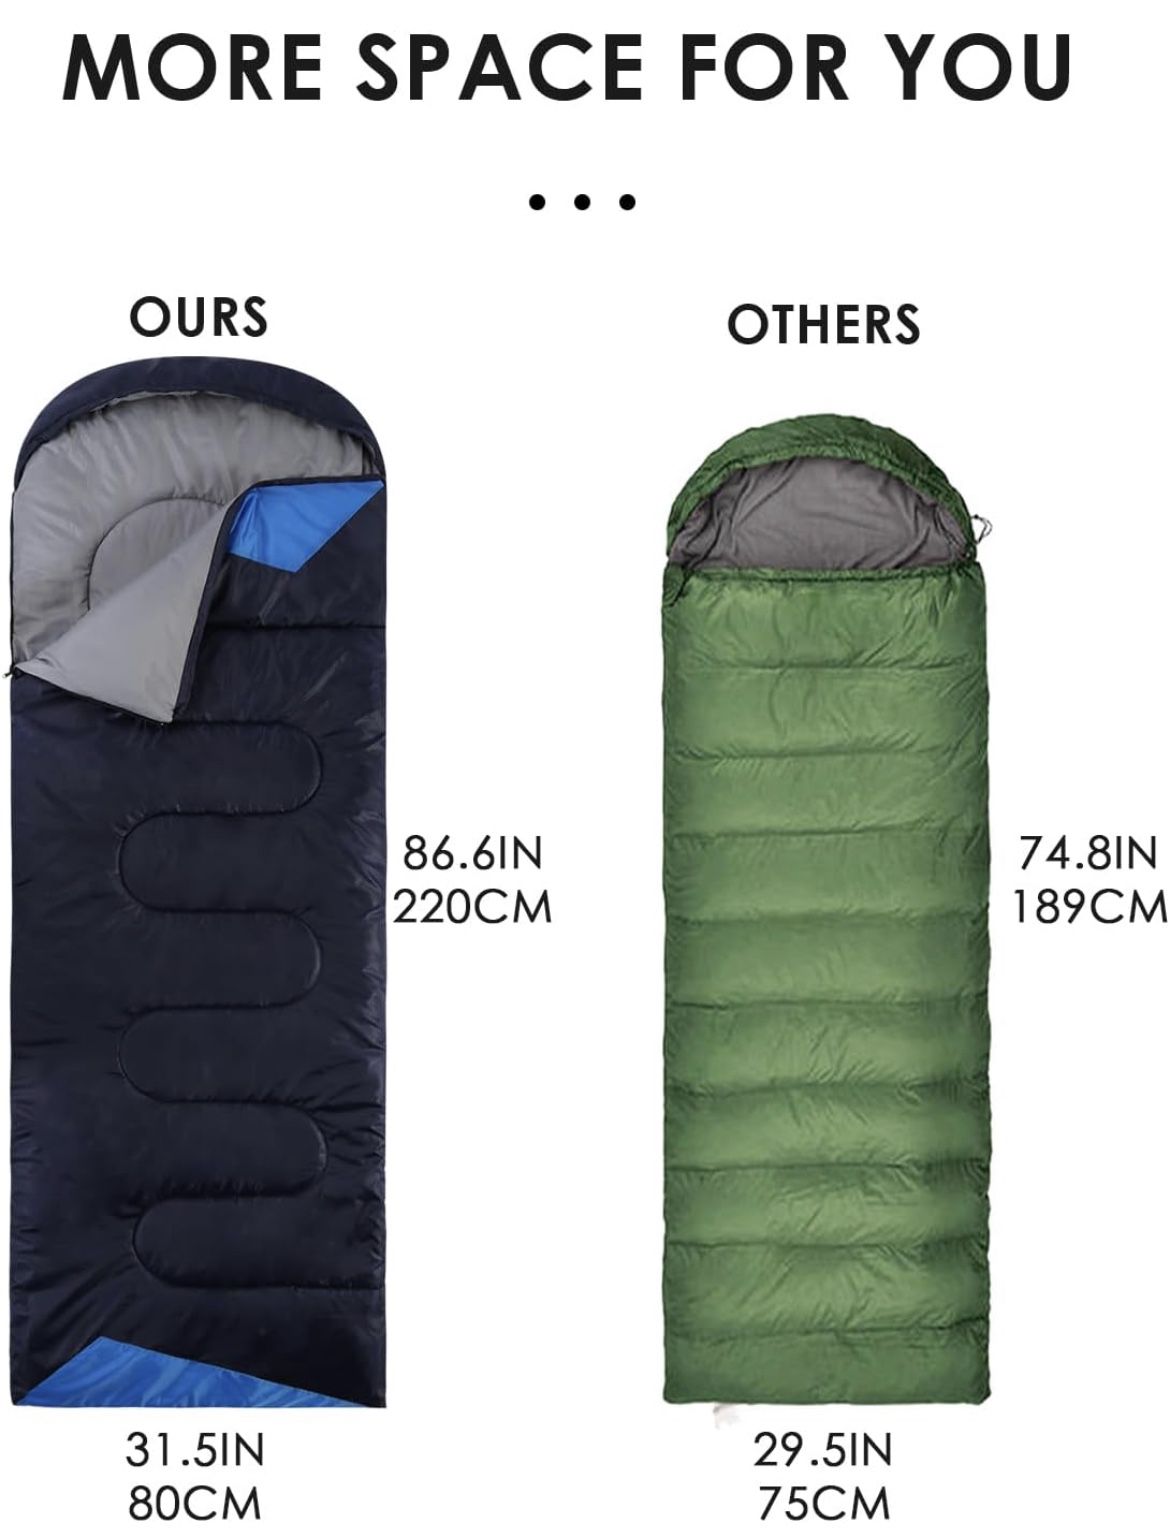 Sleeping Bags for Adults Backpacking Lightweight Waterproof- Cold Weather Sleeping Bag for Girls Boys Mens for Warm Camping Hiking Outdoor Travel Hunt